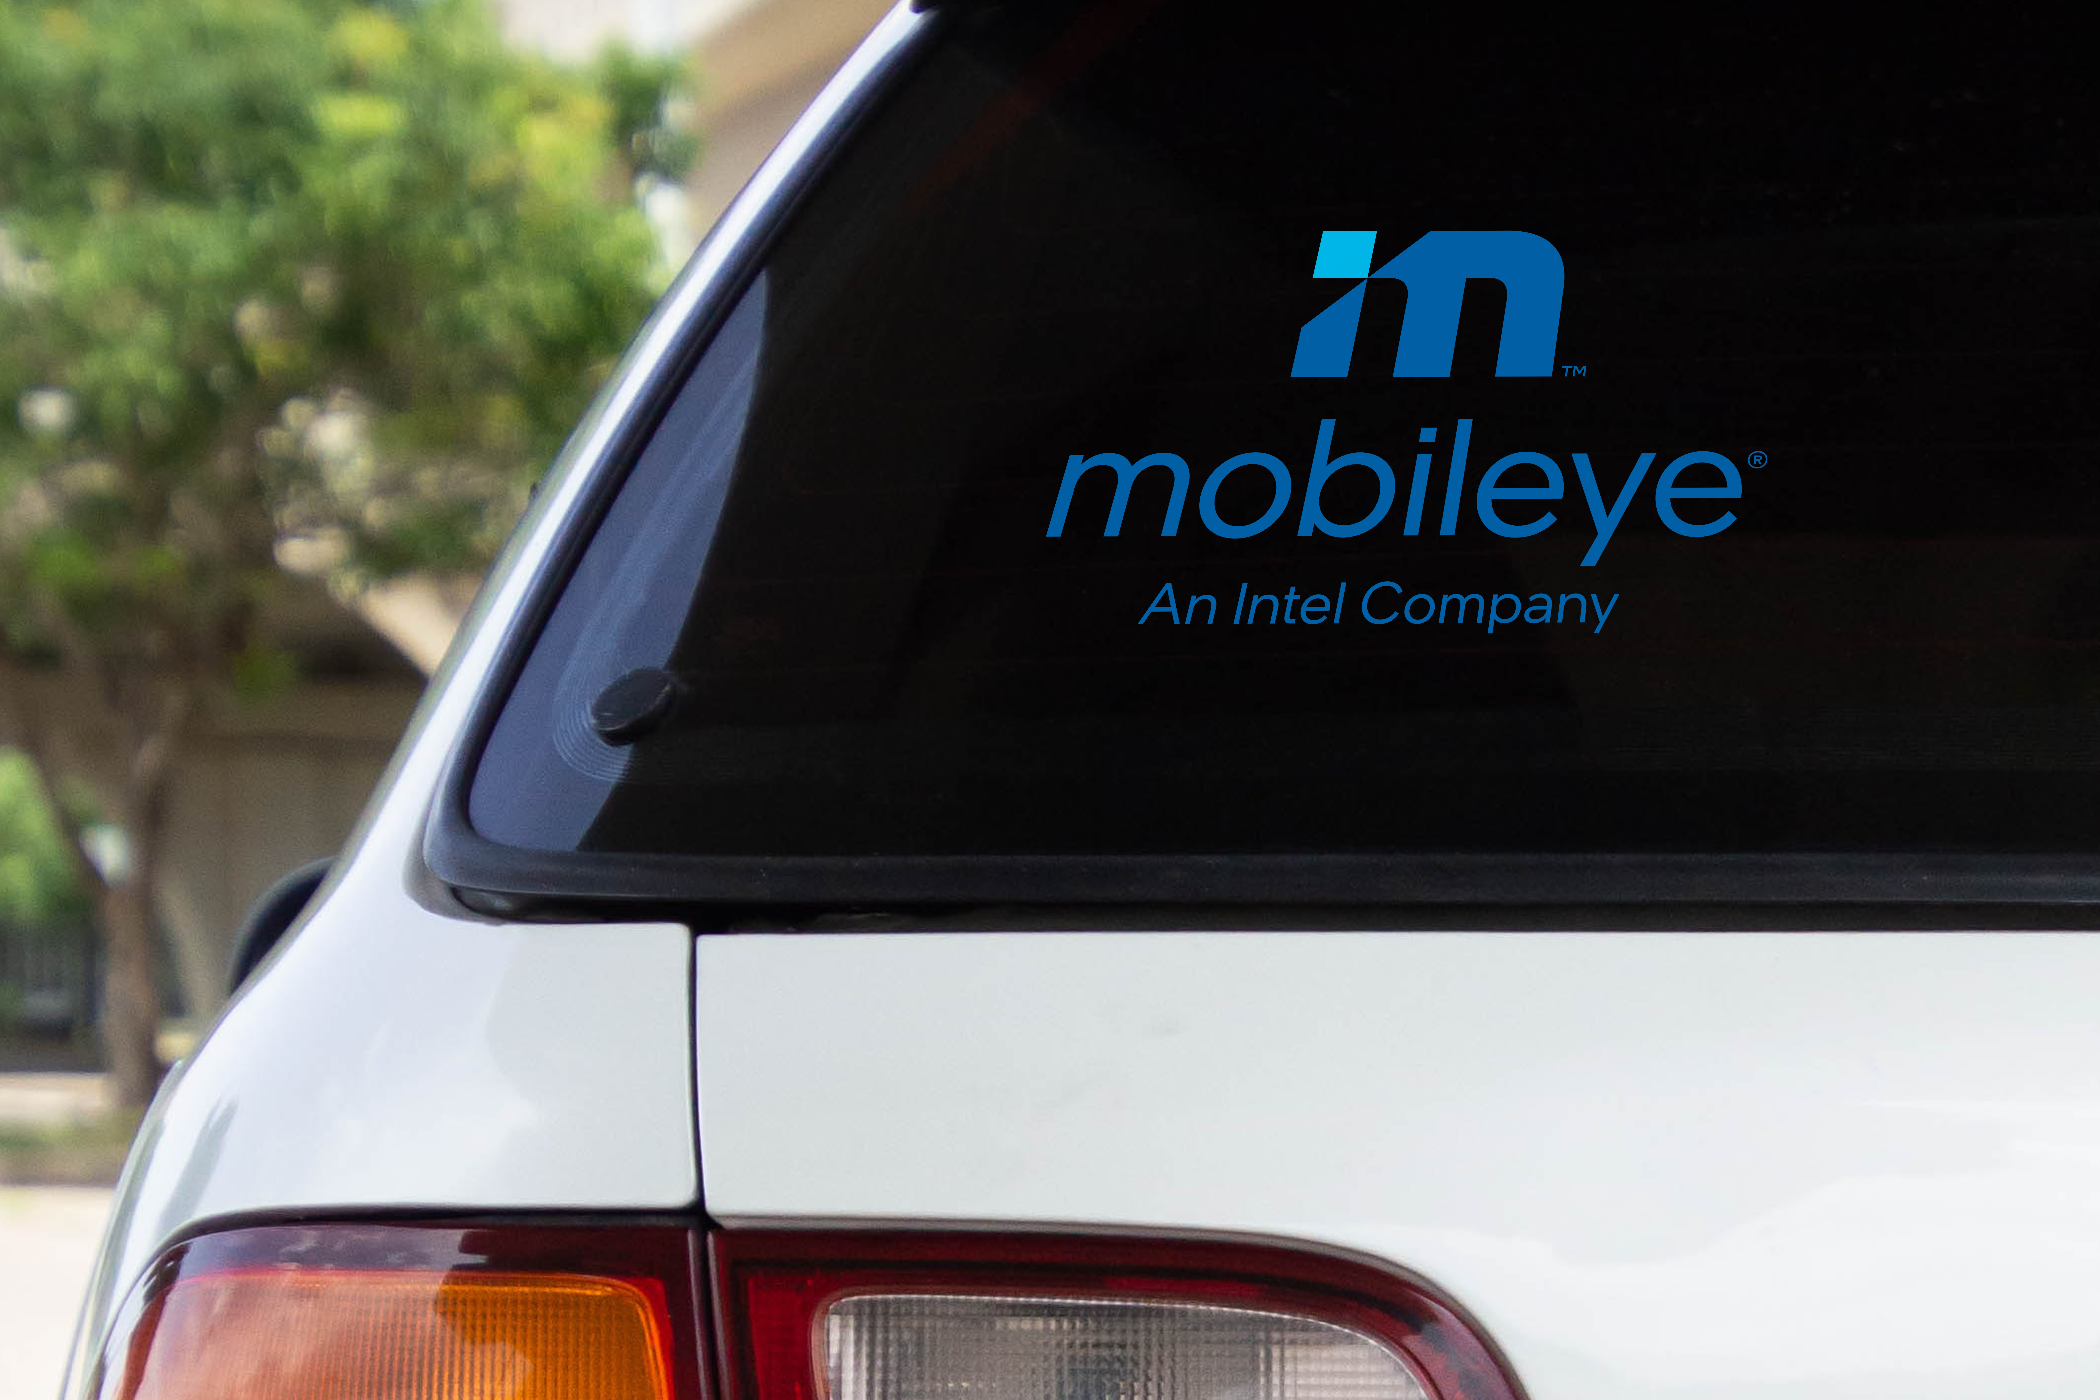 Mobileye Initial Public Offering (IPO)